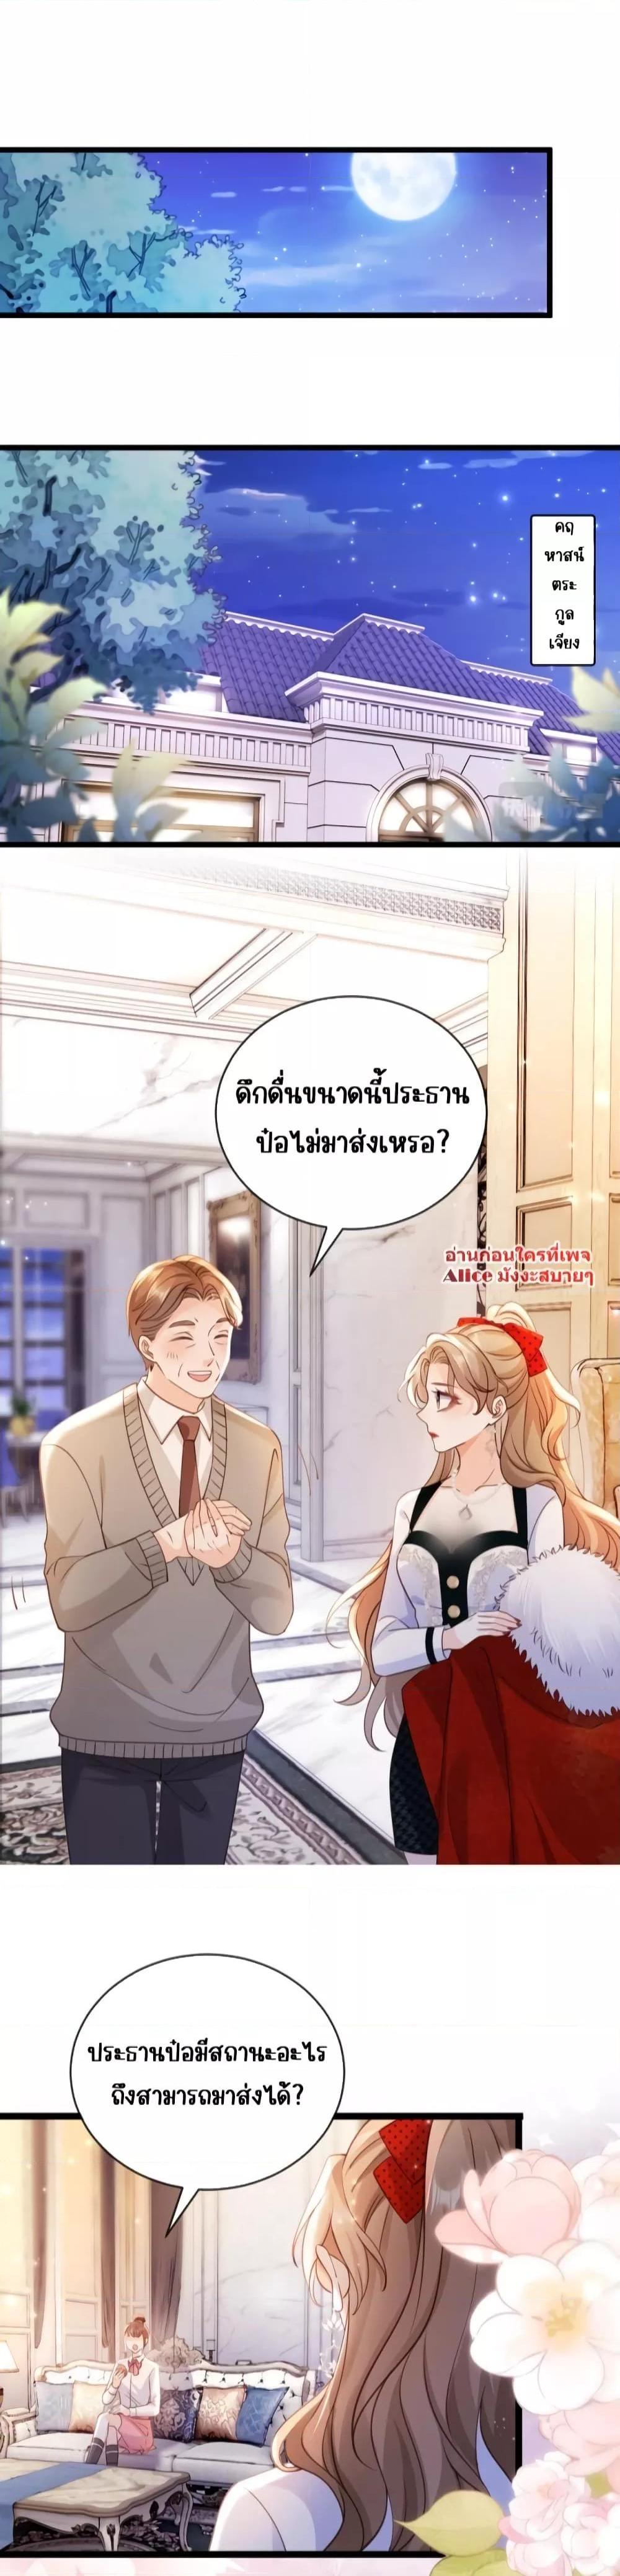 Goxuewen Female Supporting Role She Quit โ€“ เธเธญเธเธฐเธ—เธตเธเธฑเธเธเธ—เธขเธฑเธขเธ•เธฑเธงเธฃเนเธฒเธขเนเธเธเธดเธขเธฒเธขเธเนเธณเน€เธเนเธฒ เธ•เธญเธเธ—เธตเน 7 (10)